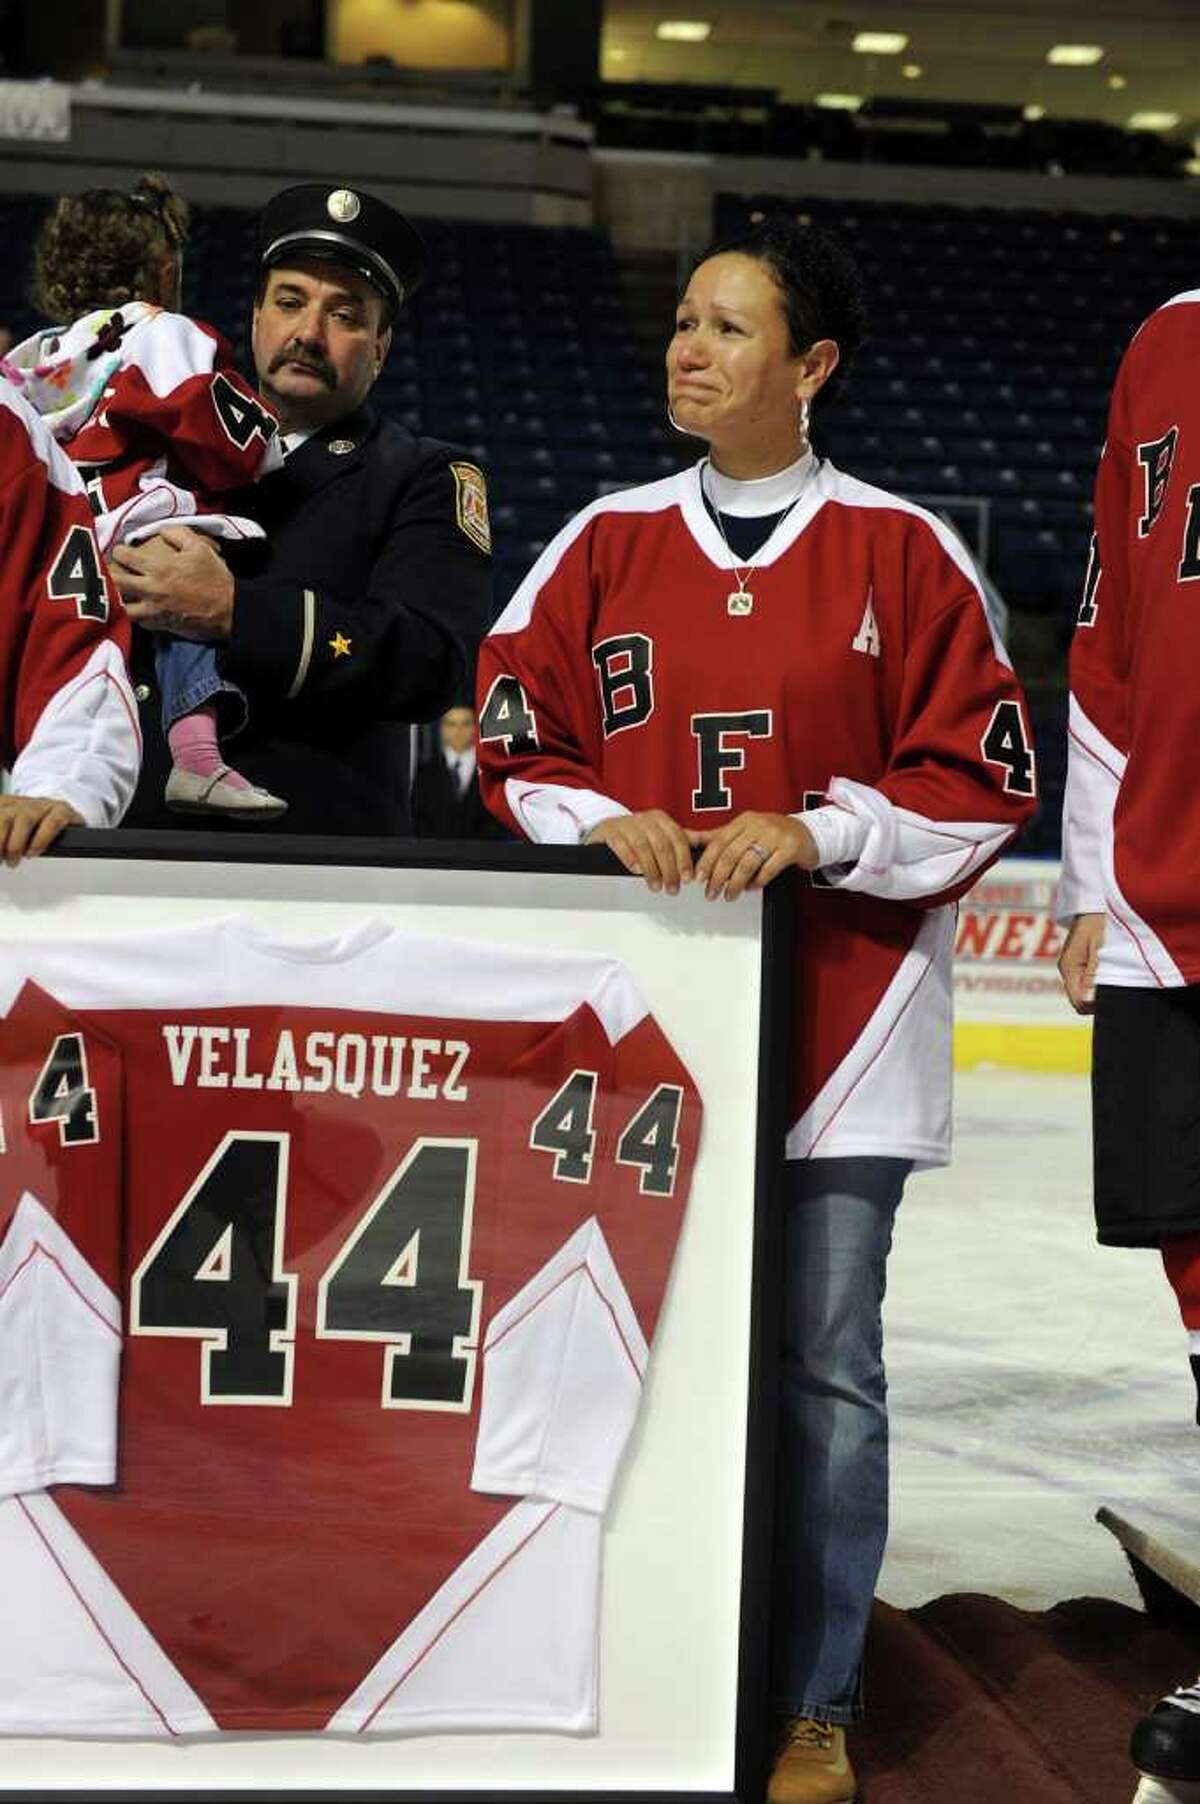 Marianne Velasquez, the widow, of Bridgeport firefighter Lt. Steven Velasquez, holds her husband's jersey which was retired before the start of a charity hockey game between firefighters from the Bridgeport and Worcester, Mass. fire departments was held at the Arena at Harbor Yard in Bridgeport, Conn. on December 18, 2010. The game was held in honor of Velasquez and firefighters Michel Baik, who died fighting a house fire this past July. Velasquez was an active member on the department's hockey team. Proceeds raised from the event go to the Bridgeport Fallen Firefiighters Fund.